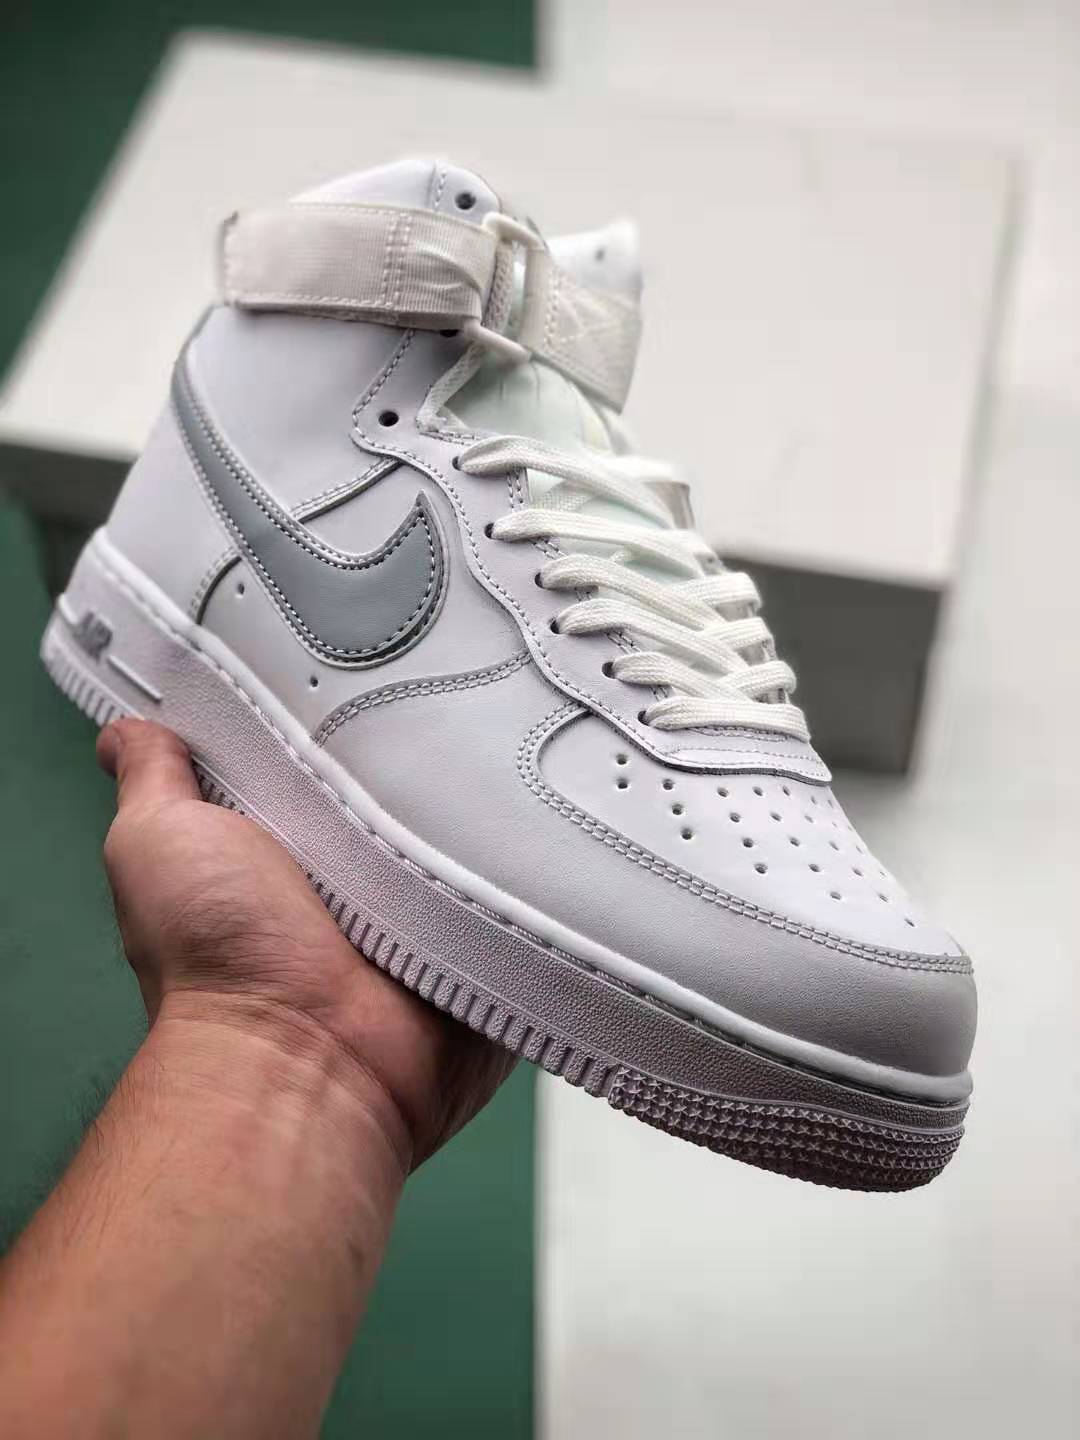 Nike Air Force 1 High '07 'White Wolf Grey' AT4141-100 - Stylish and Versatile Footwear for Any Occasion